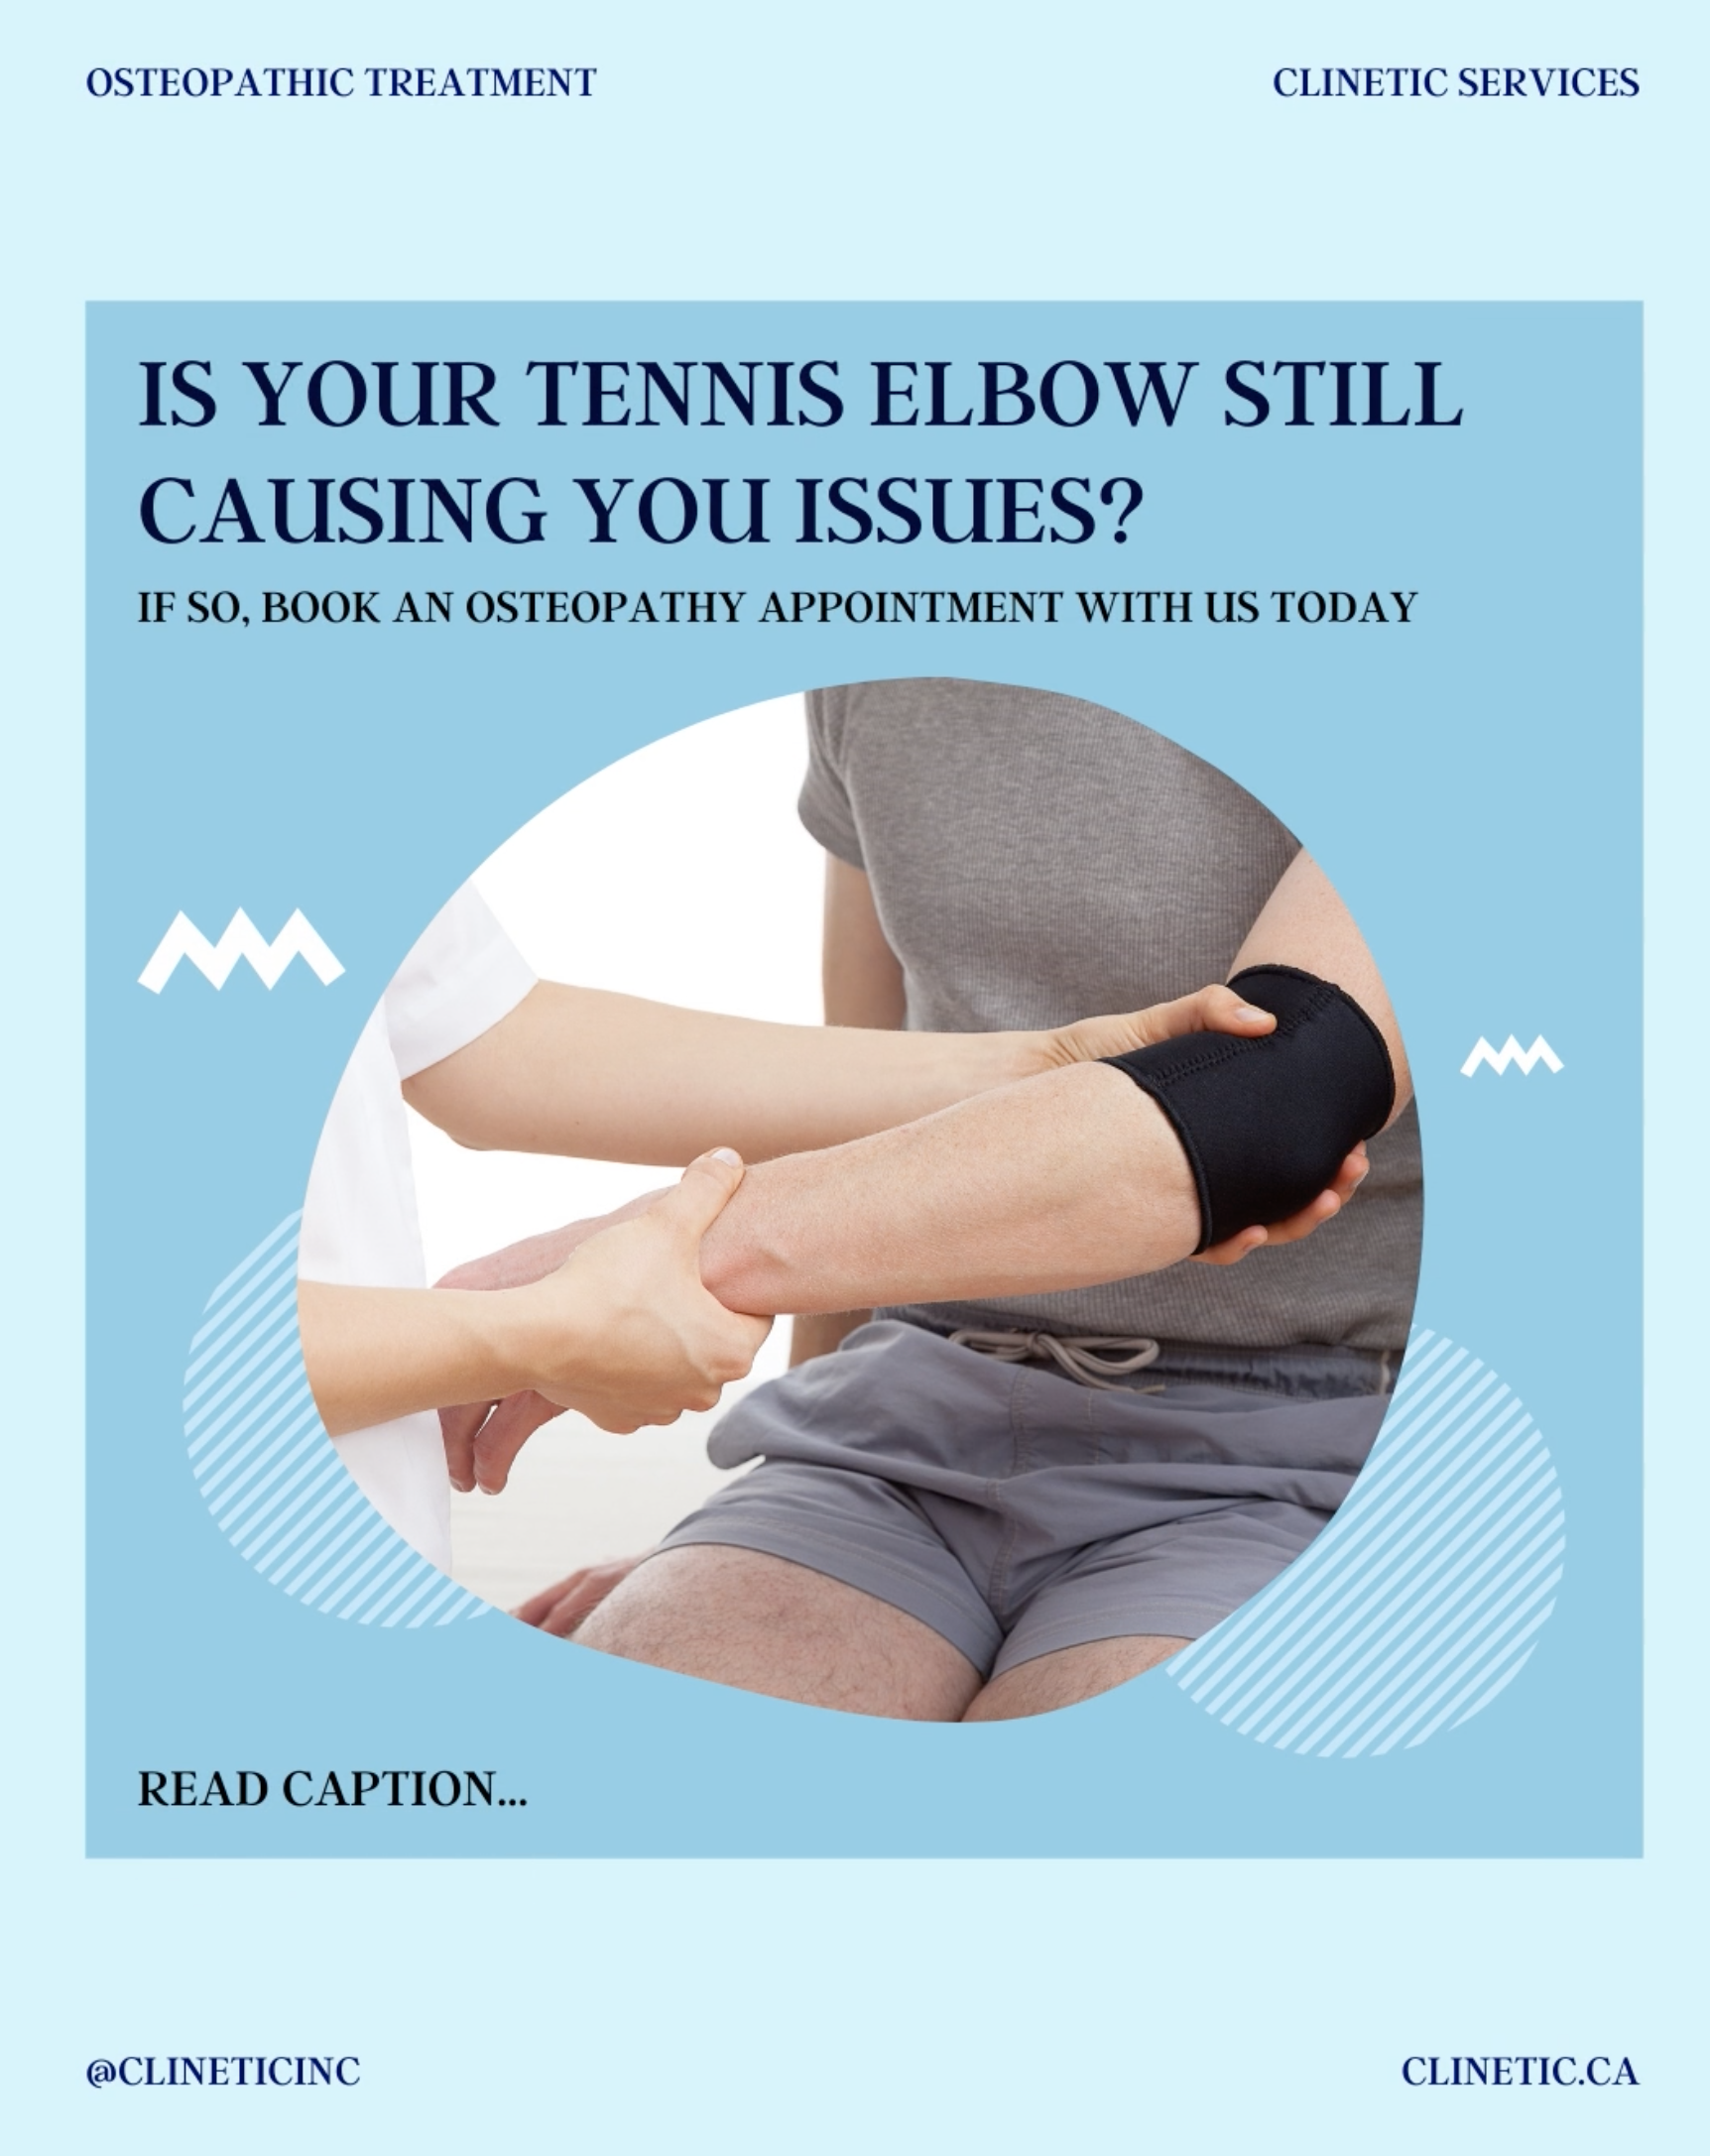 Is your tennis elbow still causing you issues?